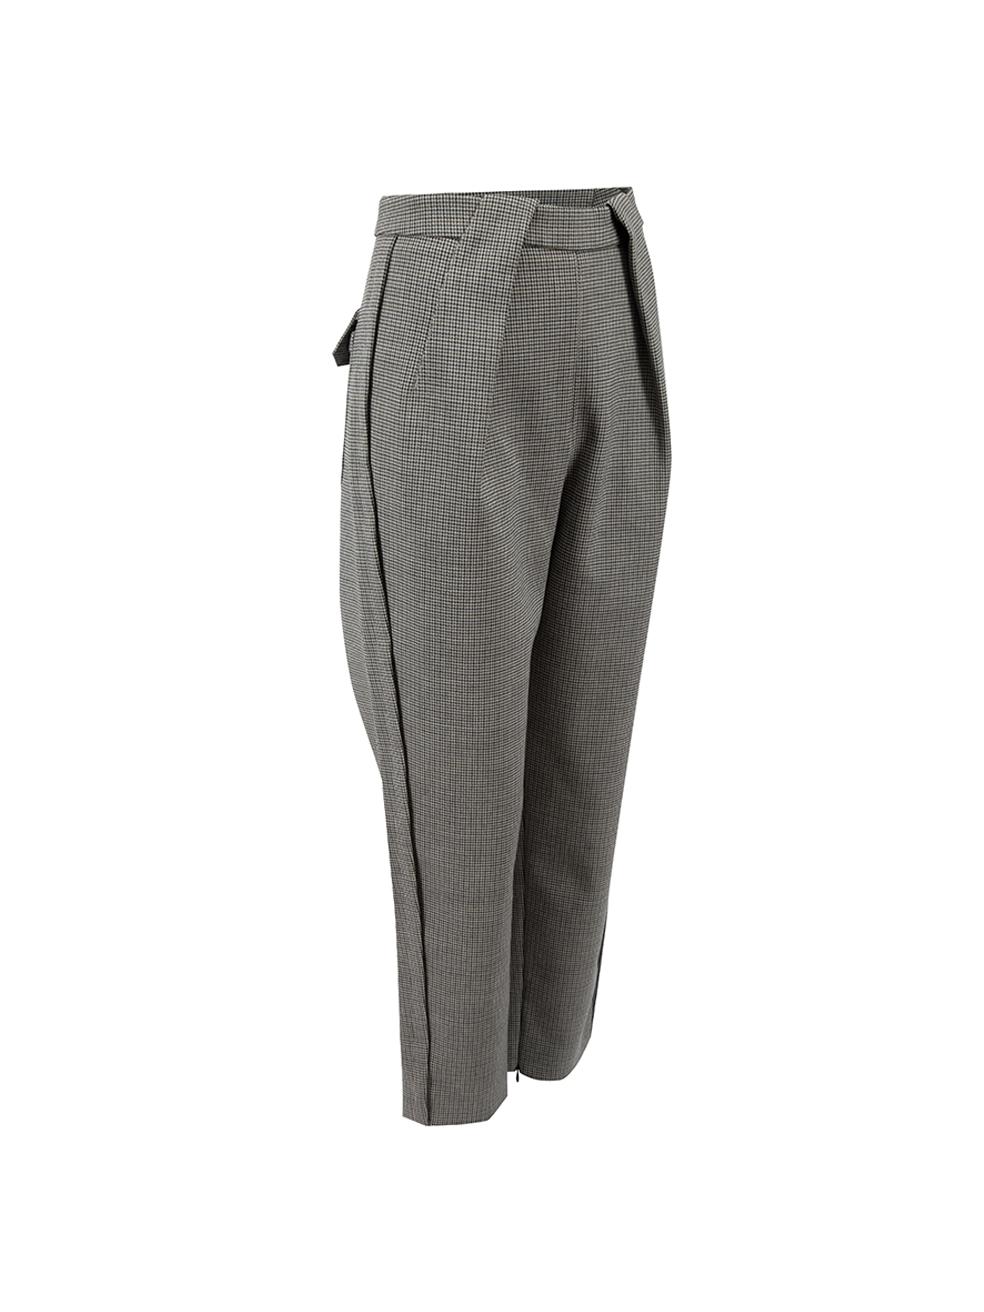 CONDITION is Never Worn. No visible wear to trousers is evident on this used Balenciaga designer resale item.



Details


Grey

Polyester

Straight leg trousers

Houndstooth pattern

High rise

Side zip closure with button

Front side